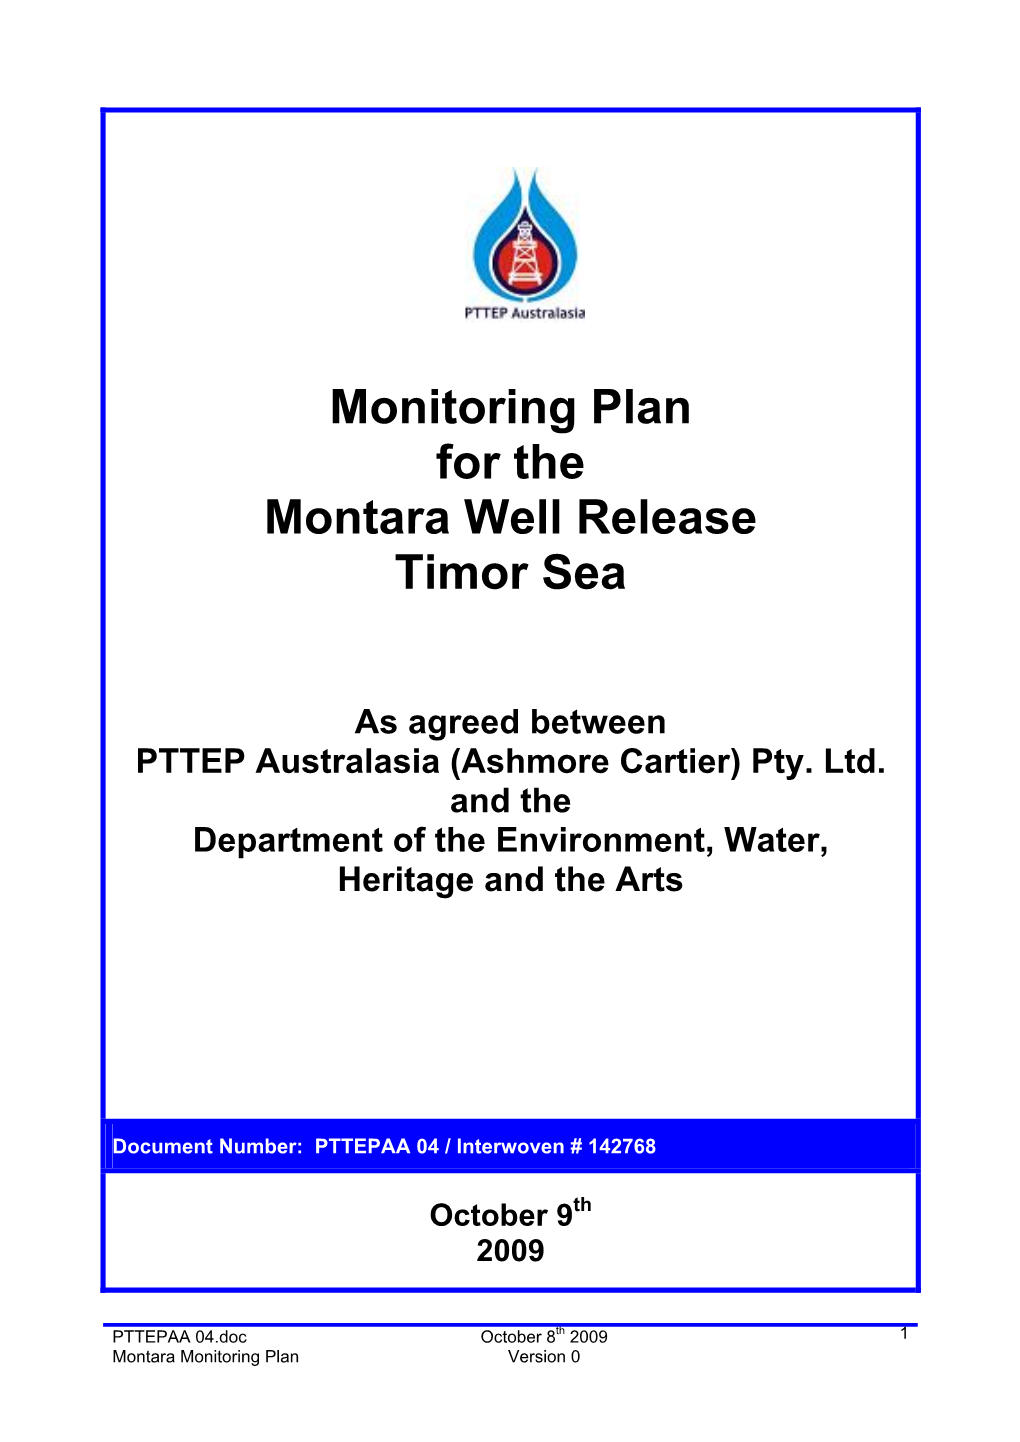 Monitoring Plan for the Montara Well Release Timor Sea